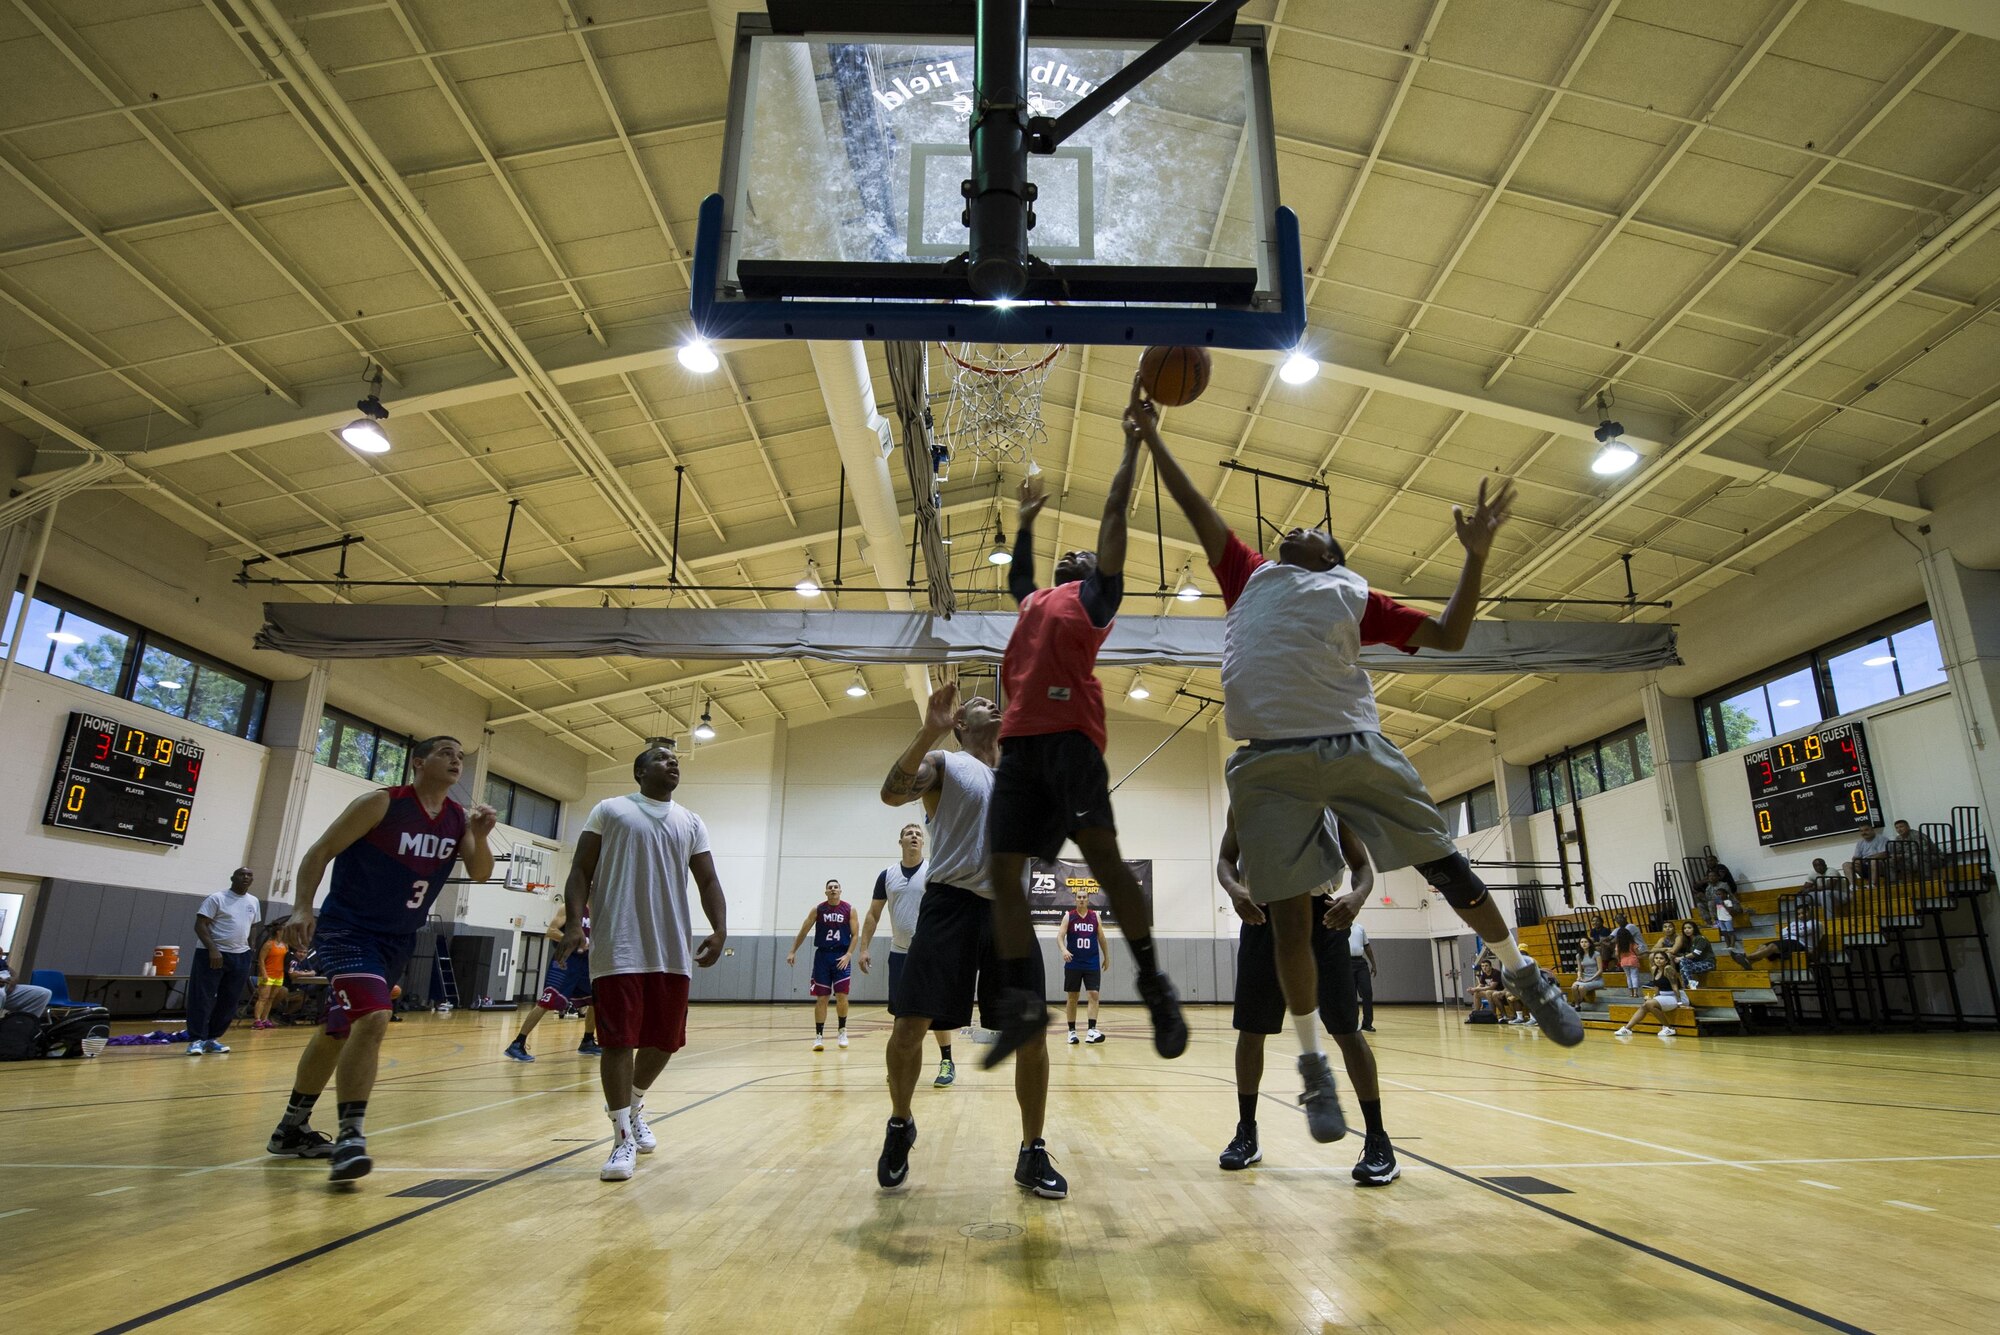 A member of 1st Special Operations Medical Group basketball team attempts a layup during the intramural basketball championship at the Aderholt Fitness Center on Hurlburt Field, Fla., April 6, 2017. For eight-weeks, 12 teams competing through a single-elimination tournament to qualify for the championship game. (U.S. Air Force photo by Airman 1st Class Joseph Pick)